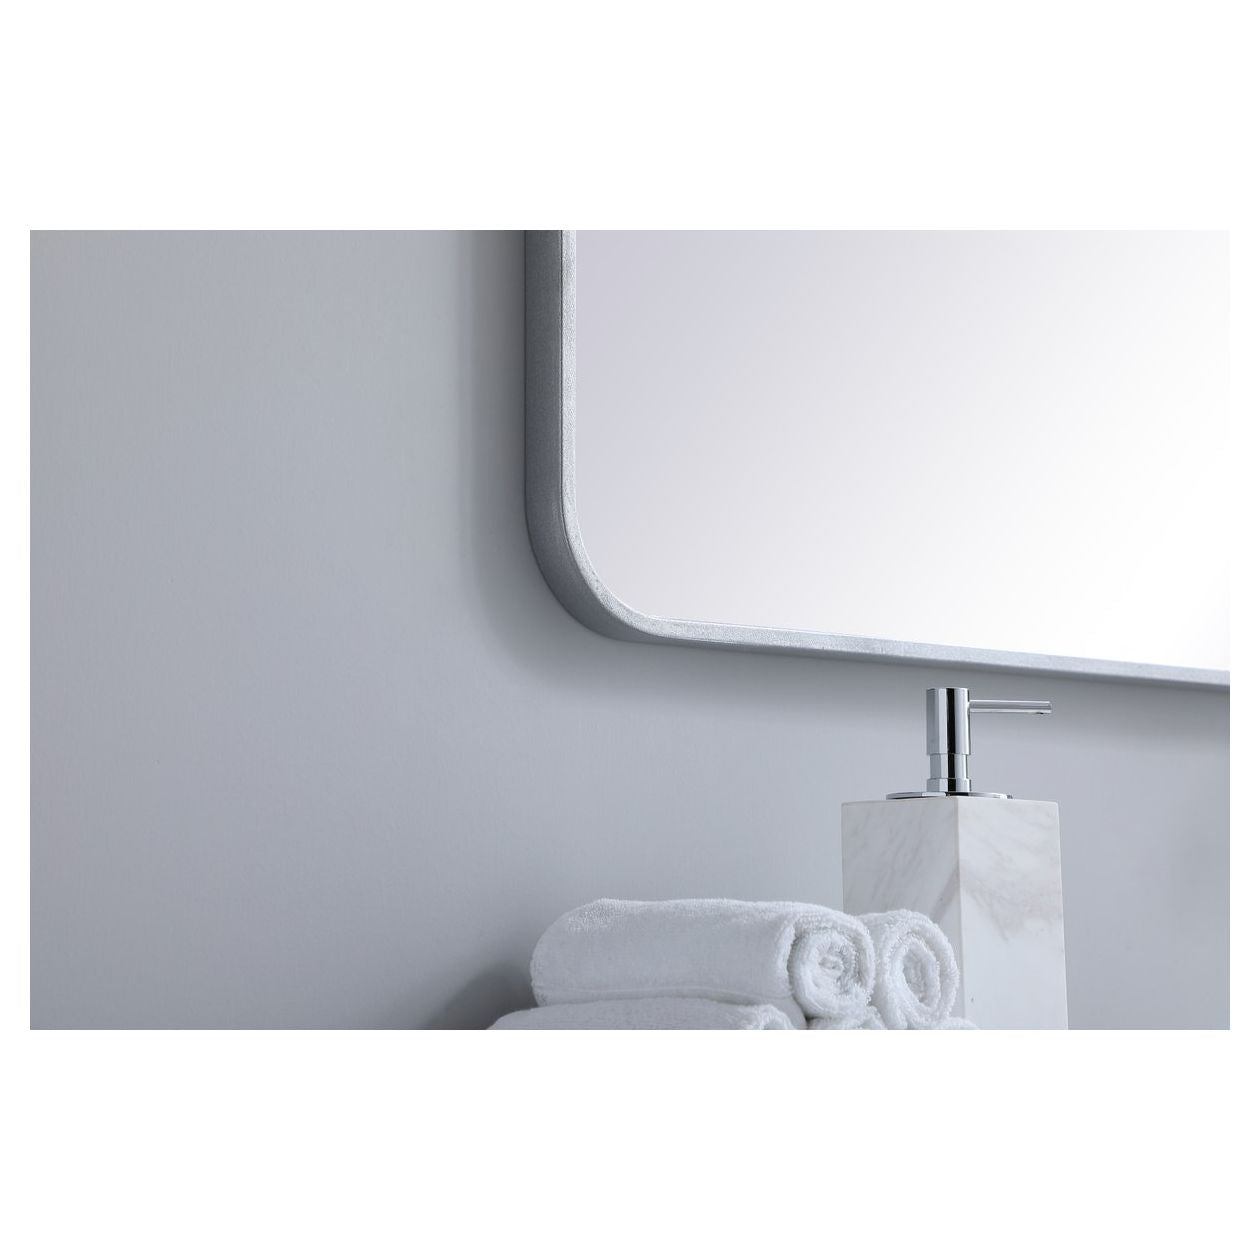 MR803036S Evermore 30" x 36" Metal Framed Rectangular Mirror in Silver